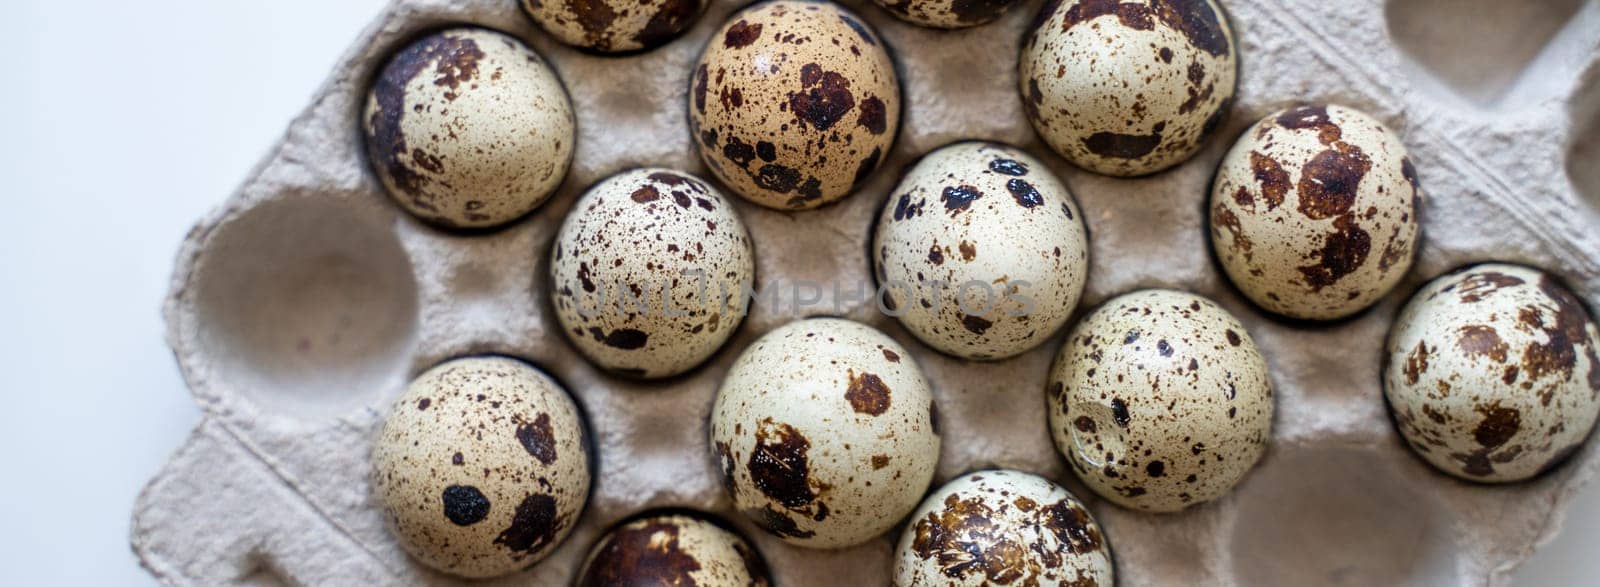 Spotted quail eggs in an egg box on a light background, natural eco-friendly products. by Matiunina